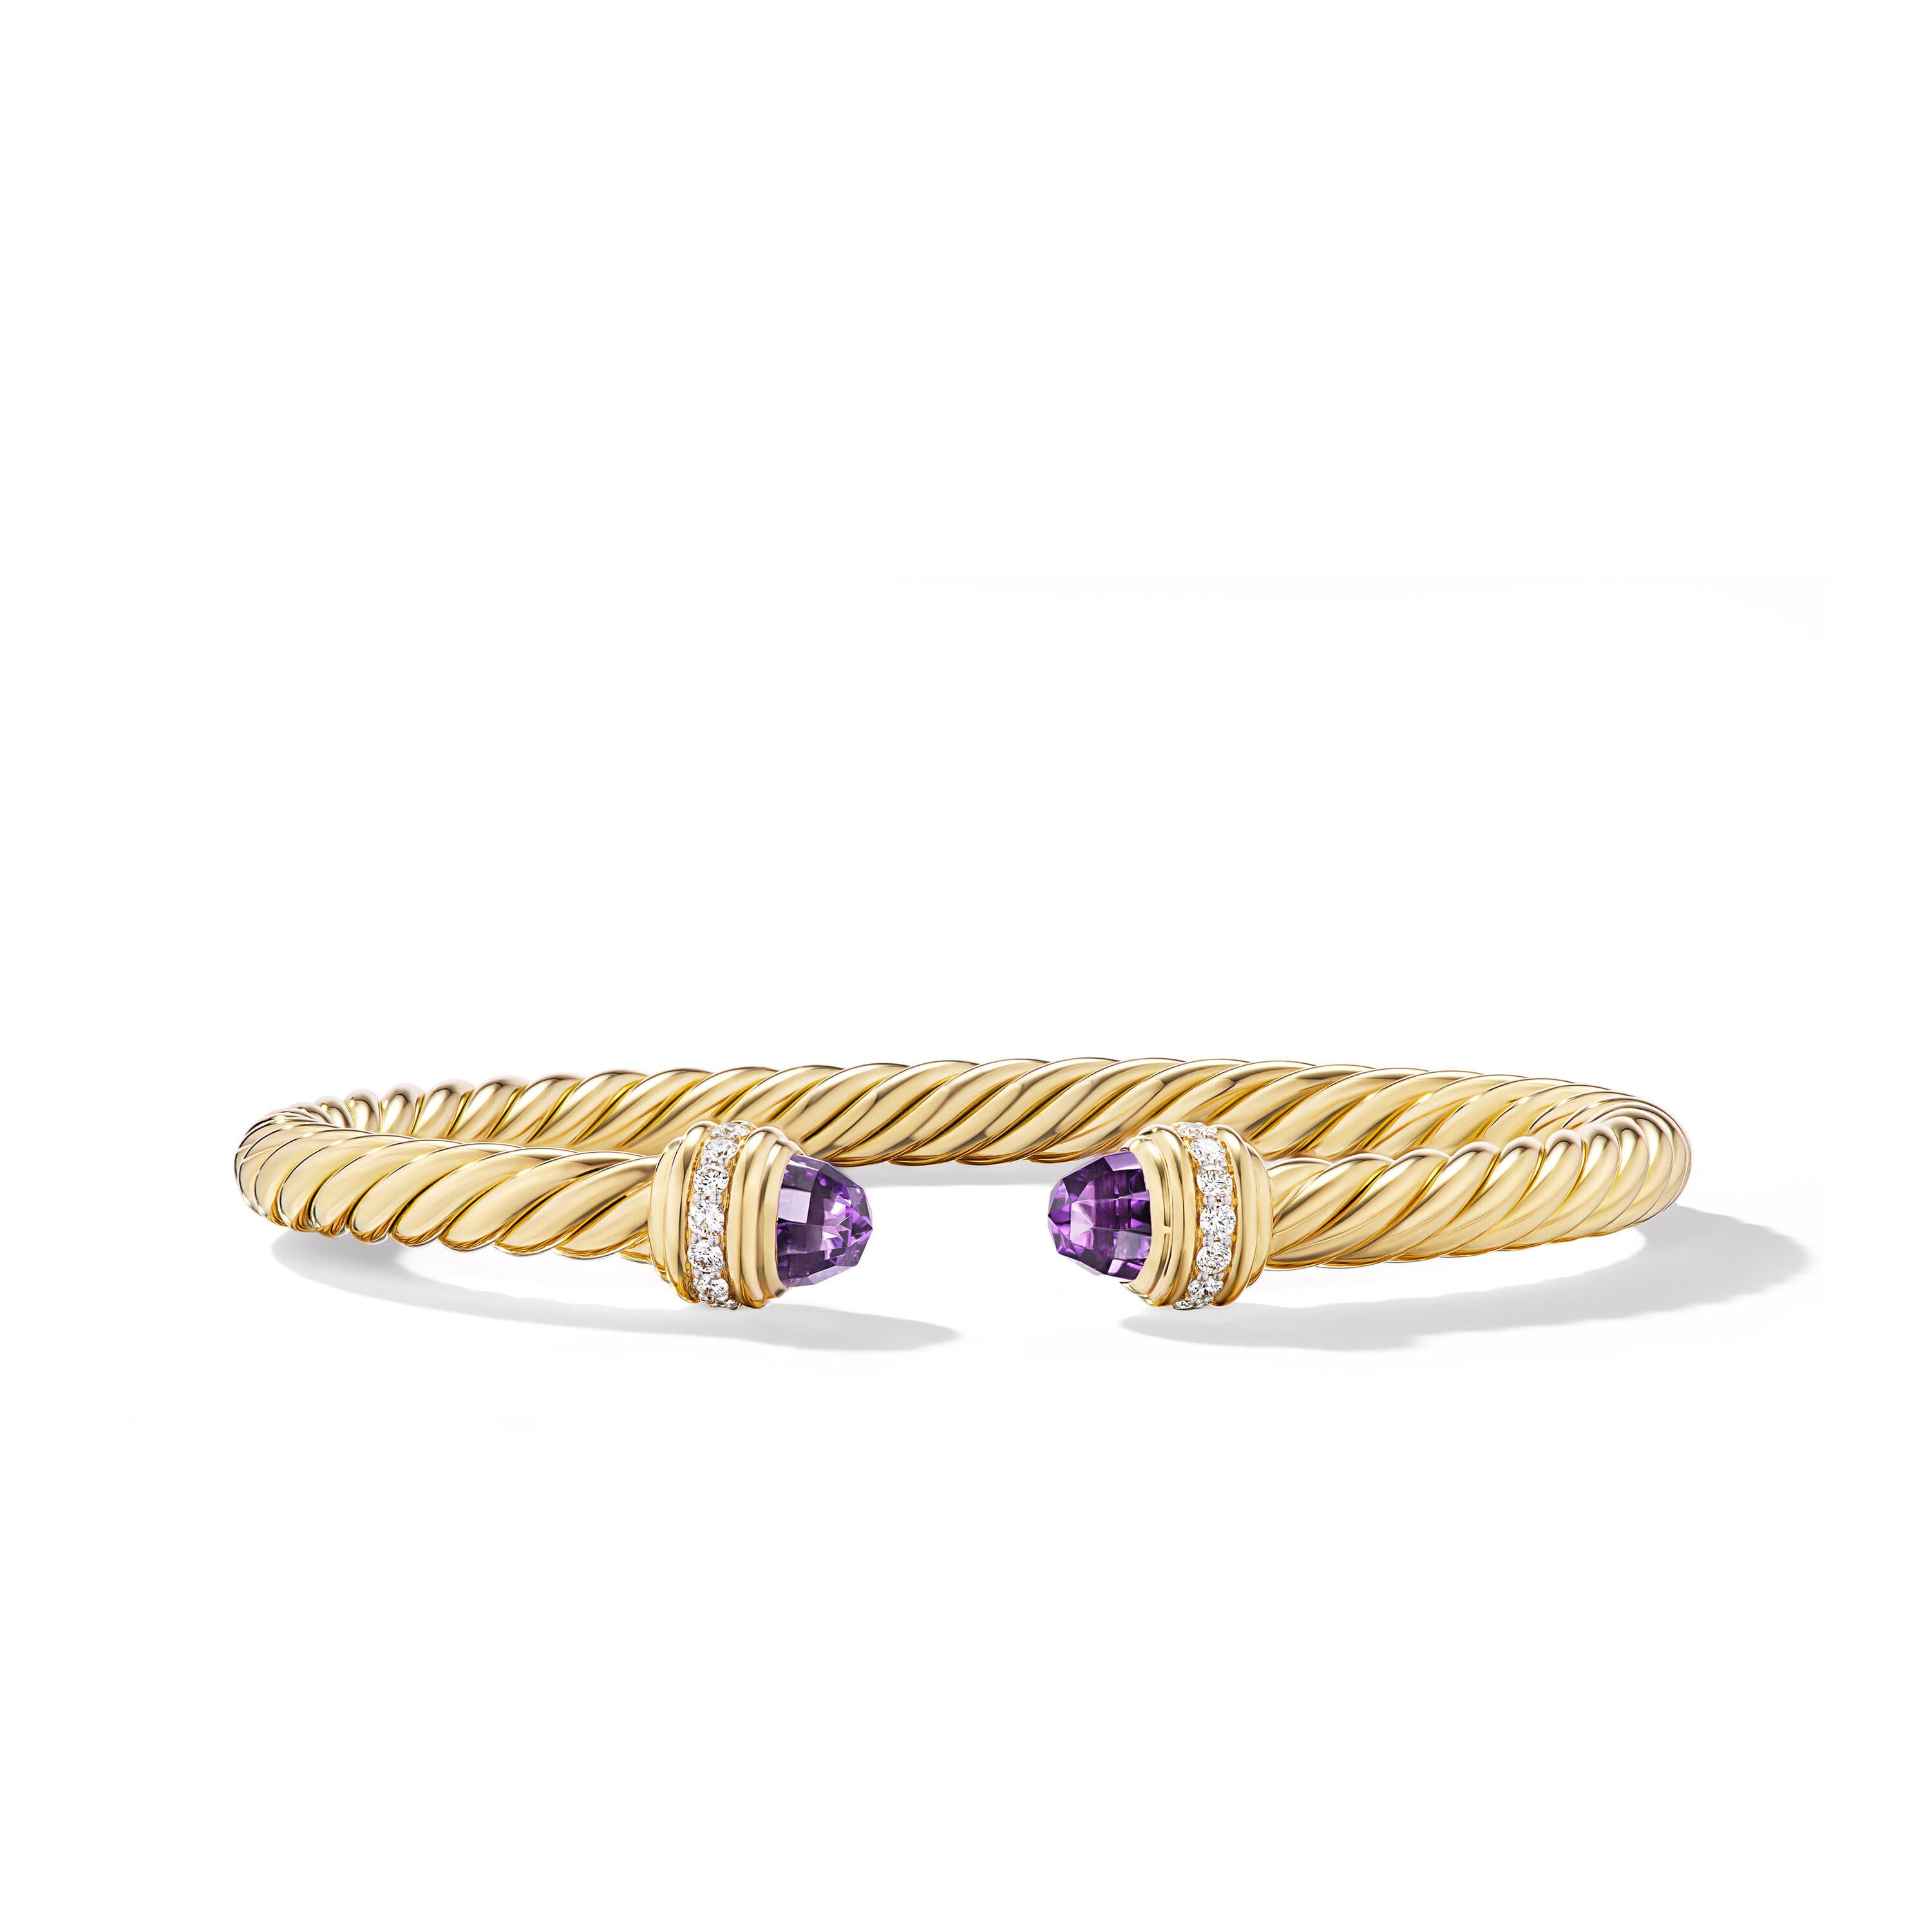 David Yurman Classic Cablespira 5mm Bracelet in 18K Yellow Gold with Amethyst and Diamonds 0